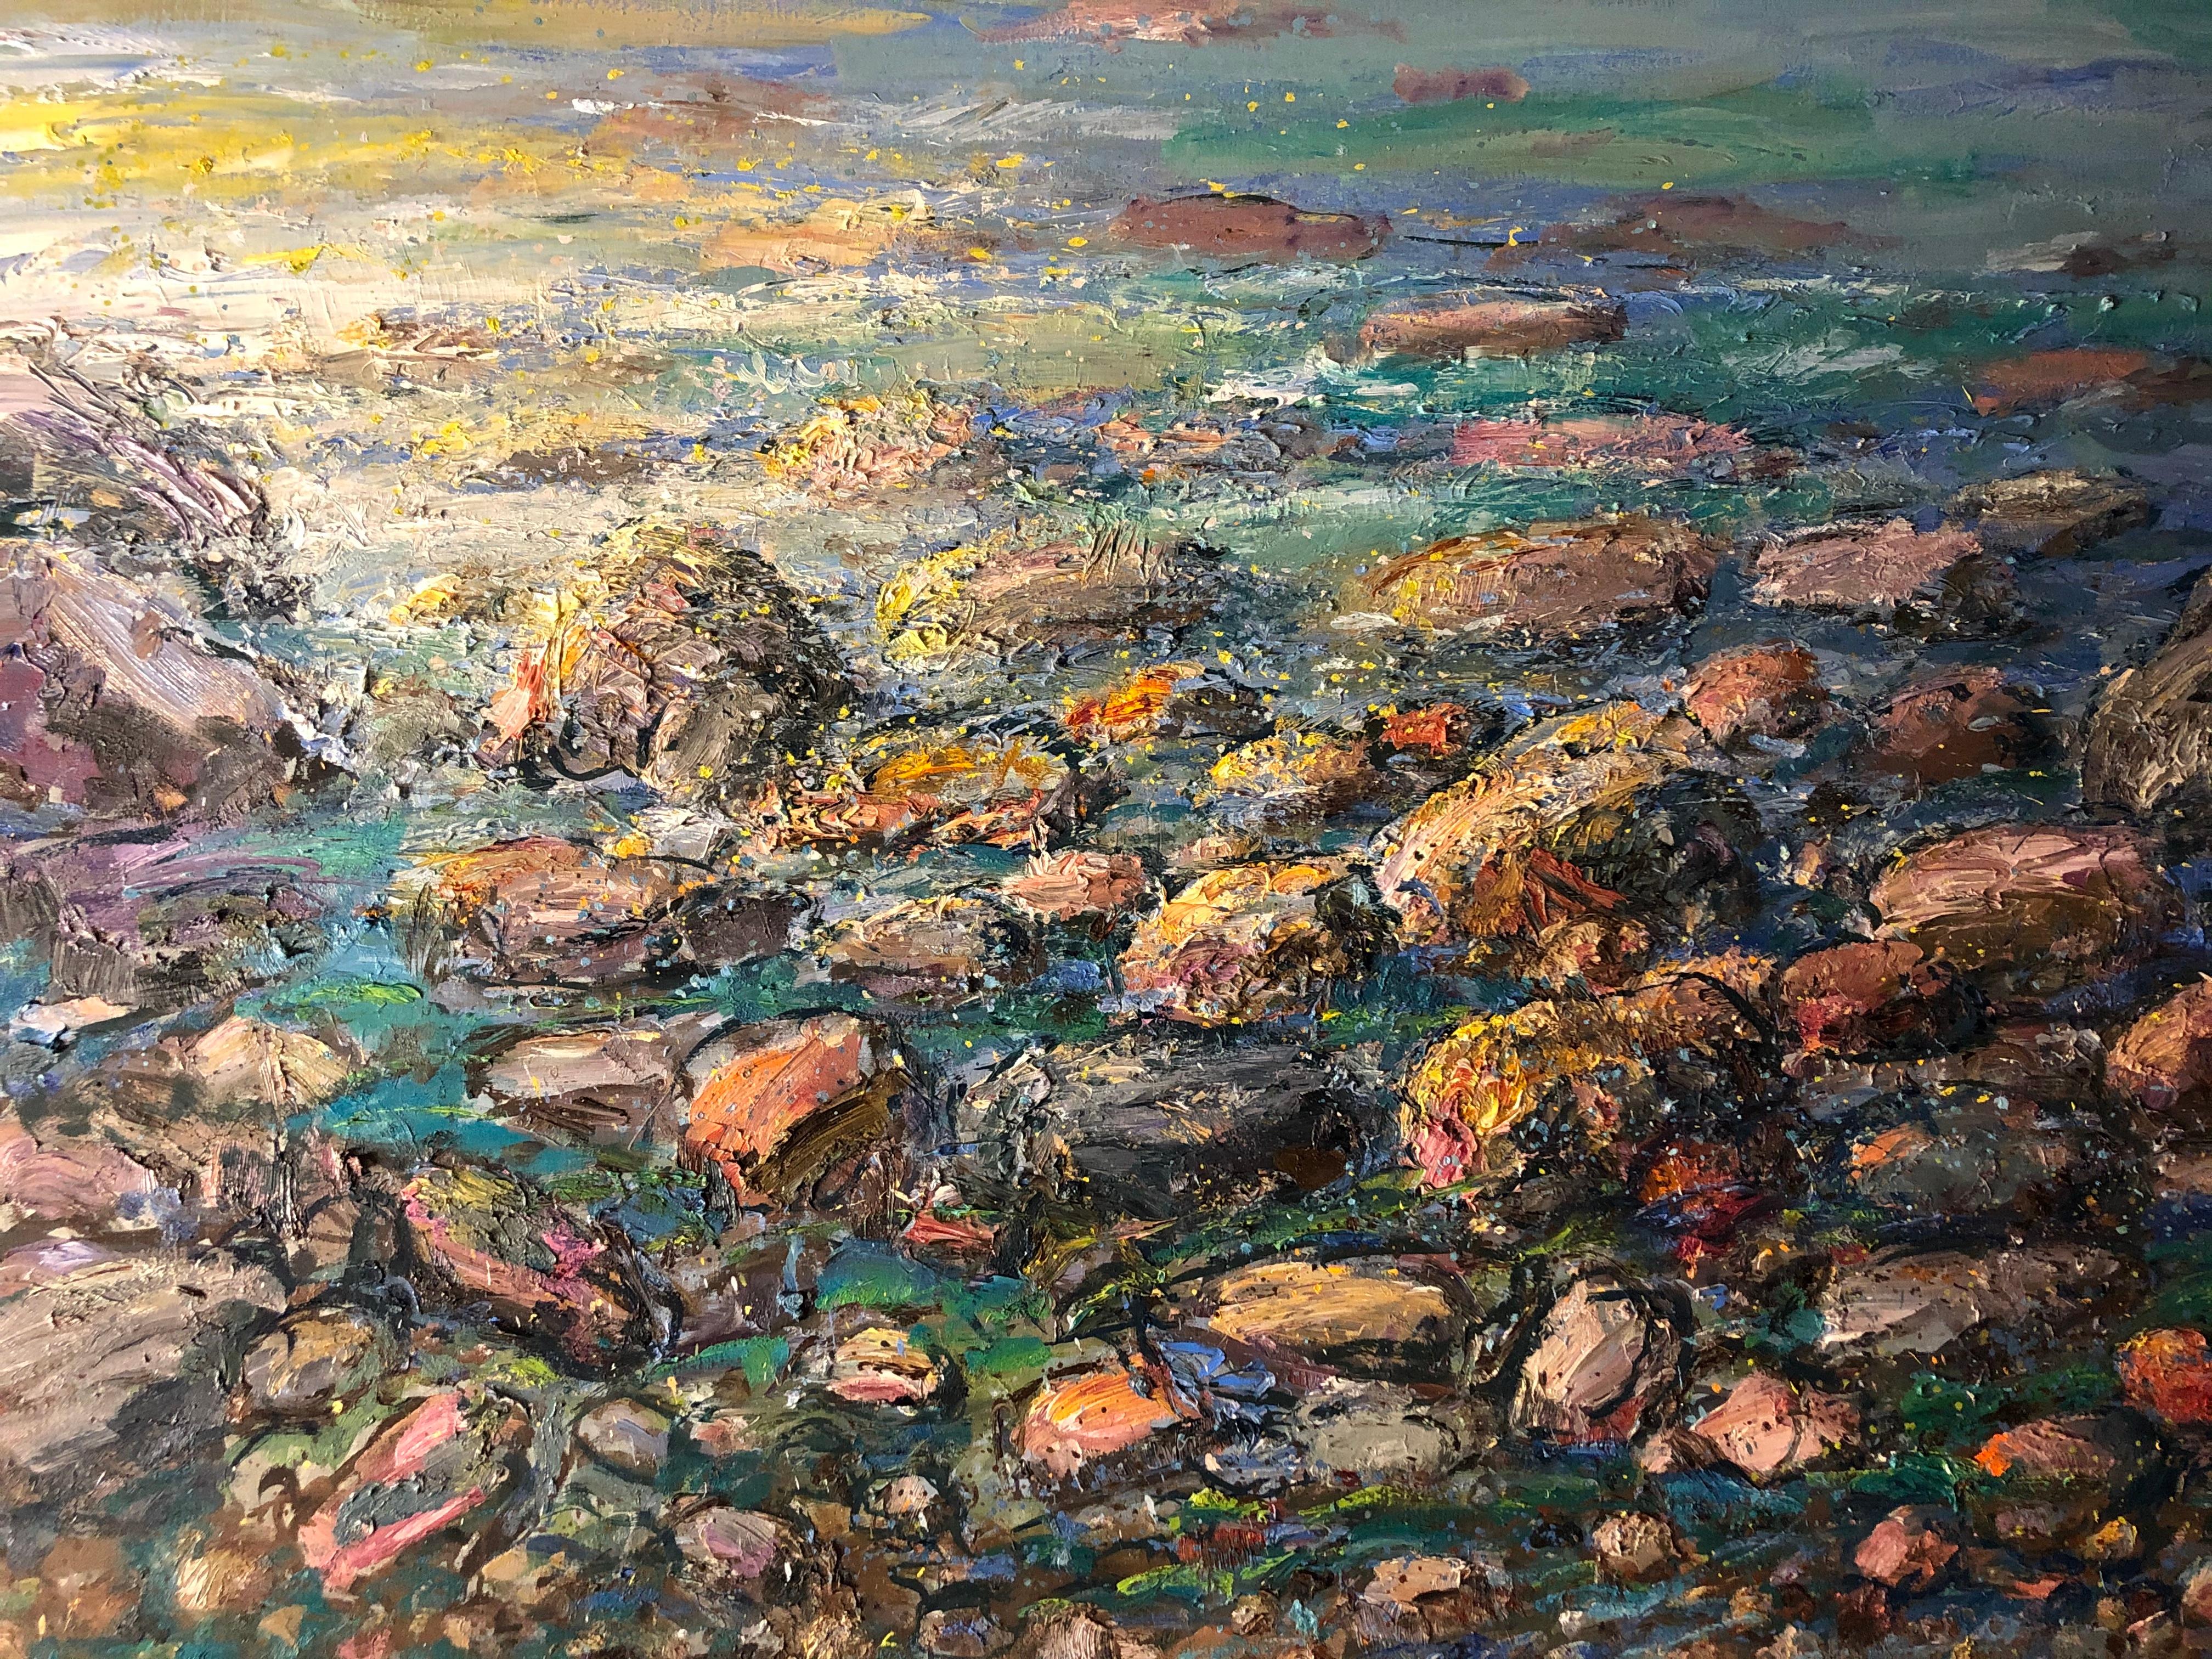 Bruno Zupan Landscape Painting - "Morning Light, Rocks and Sea"